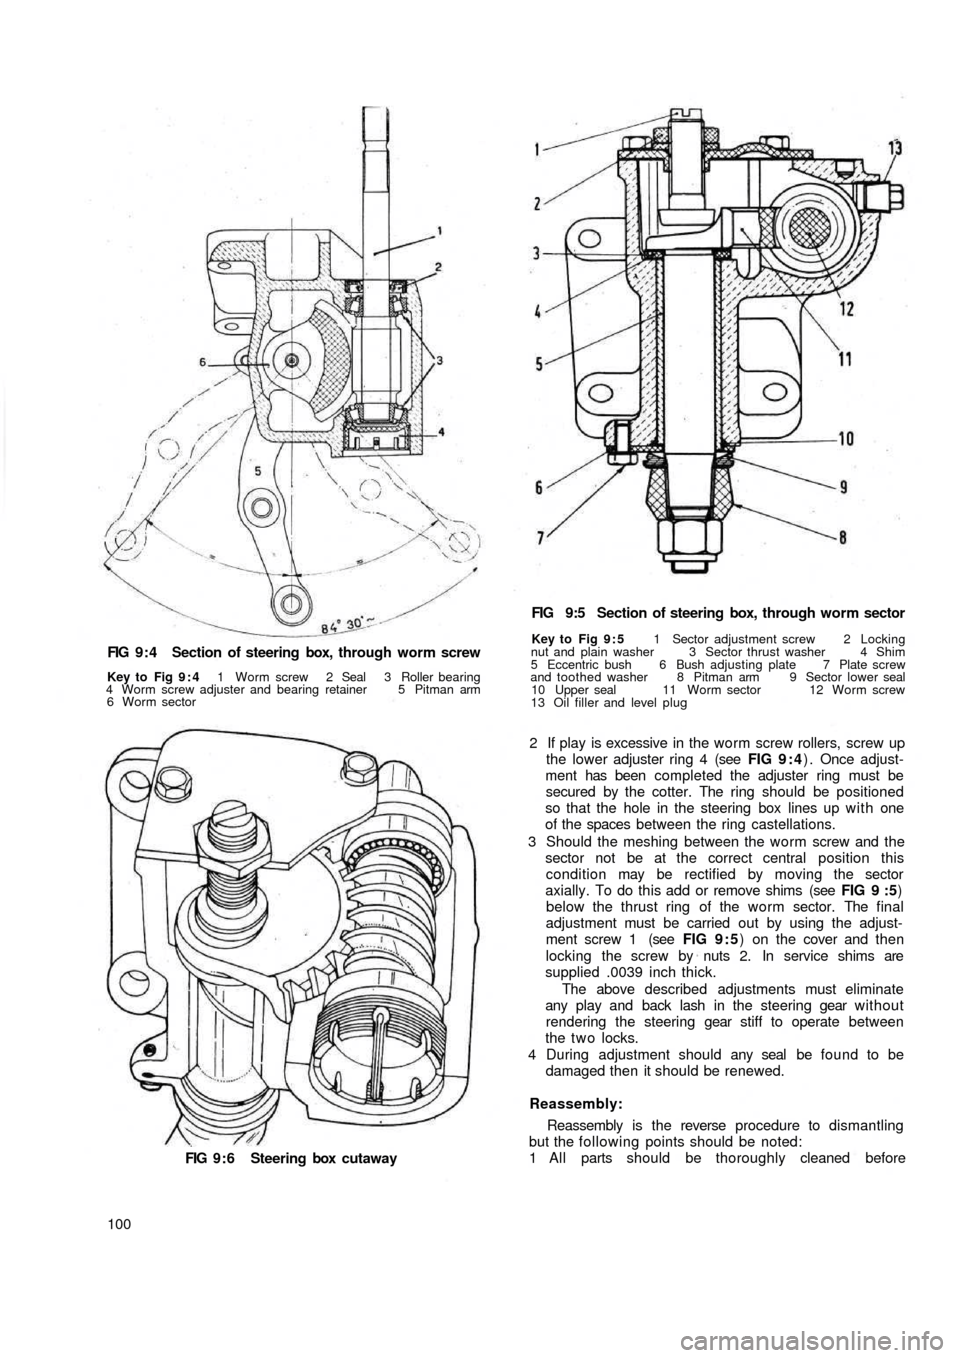 FIAT 500 1961 1.G Workshop Manual FIG 9 : 4  Section of steering box,  through worm screw
Key to  Fig 9 : 4 1 Worm screw 2 Seal 3 Roller bearing
4 Worm screw adjuster and bearing retainer 5 Pitman arm
6 Worm sector
FIG 9 : 6  Steering